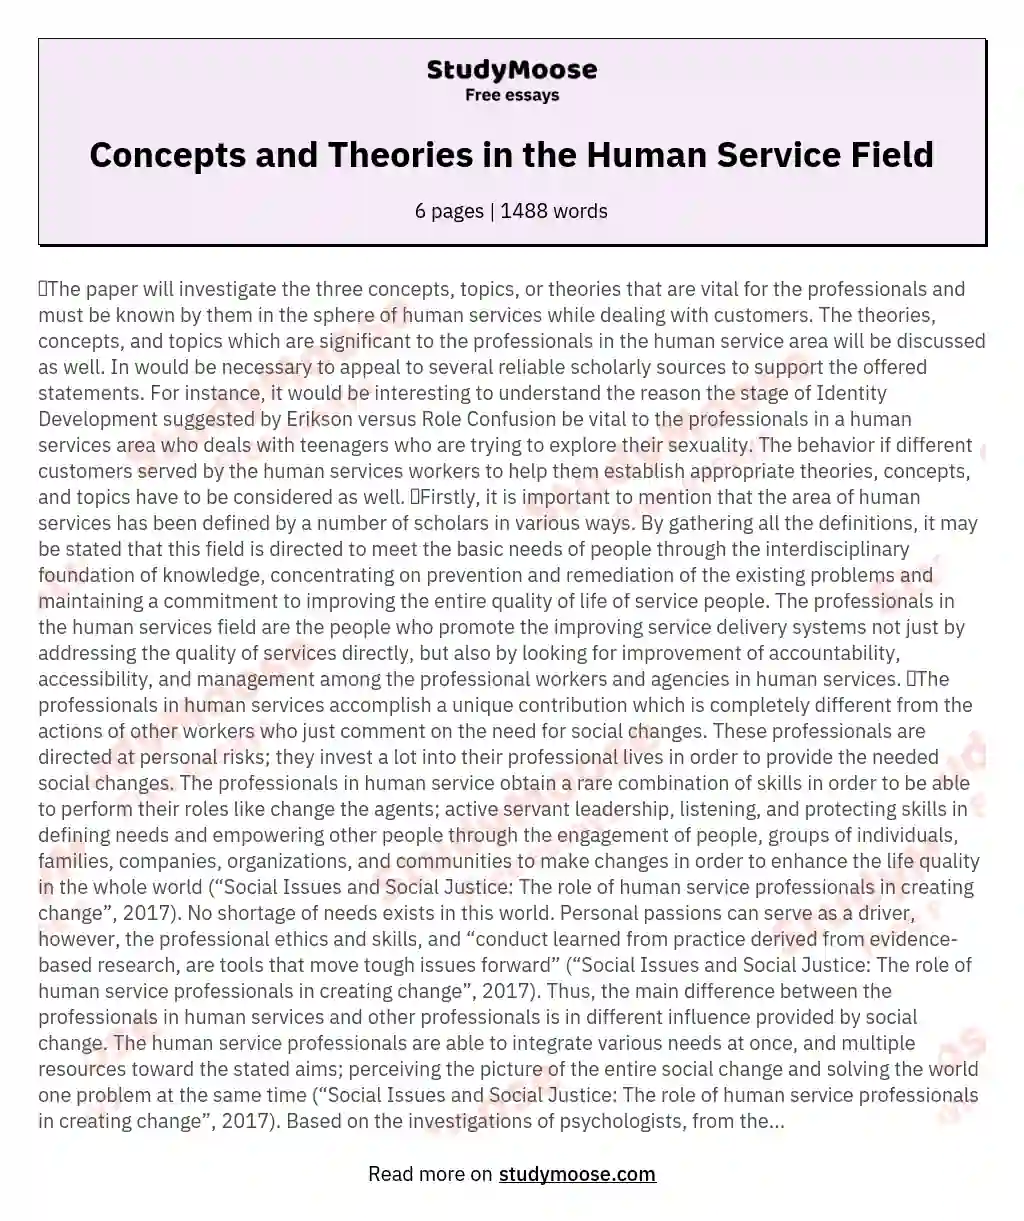 Concepts and Theories  in the Human Service Field